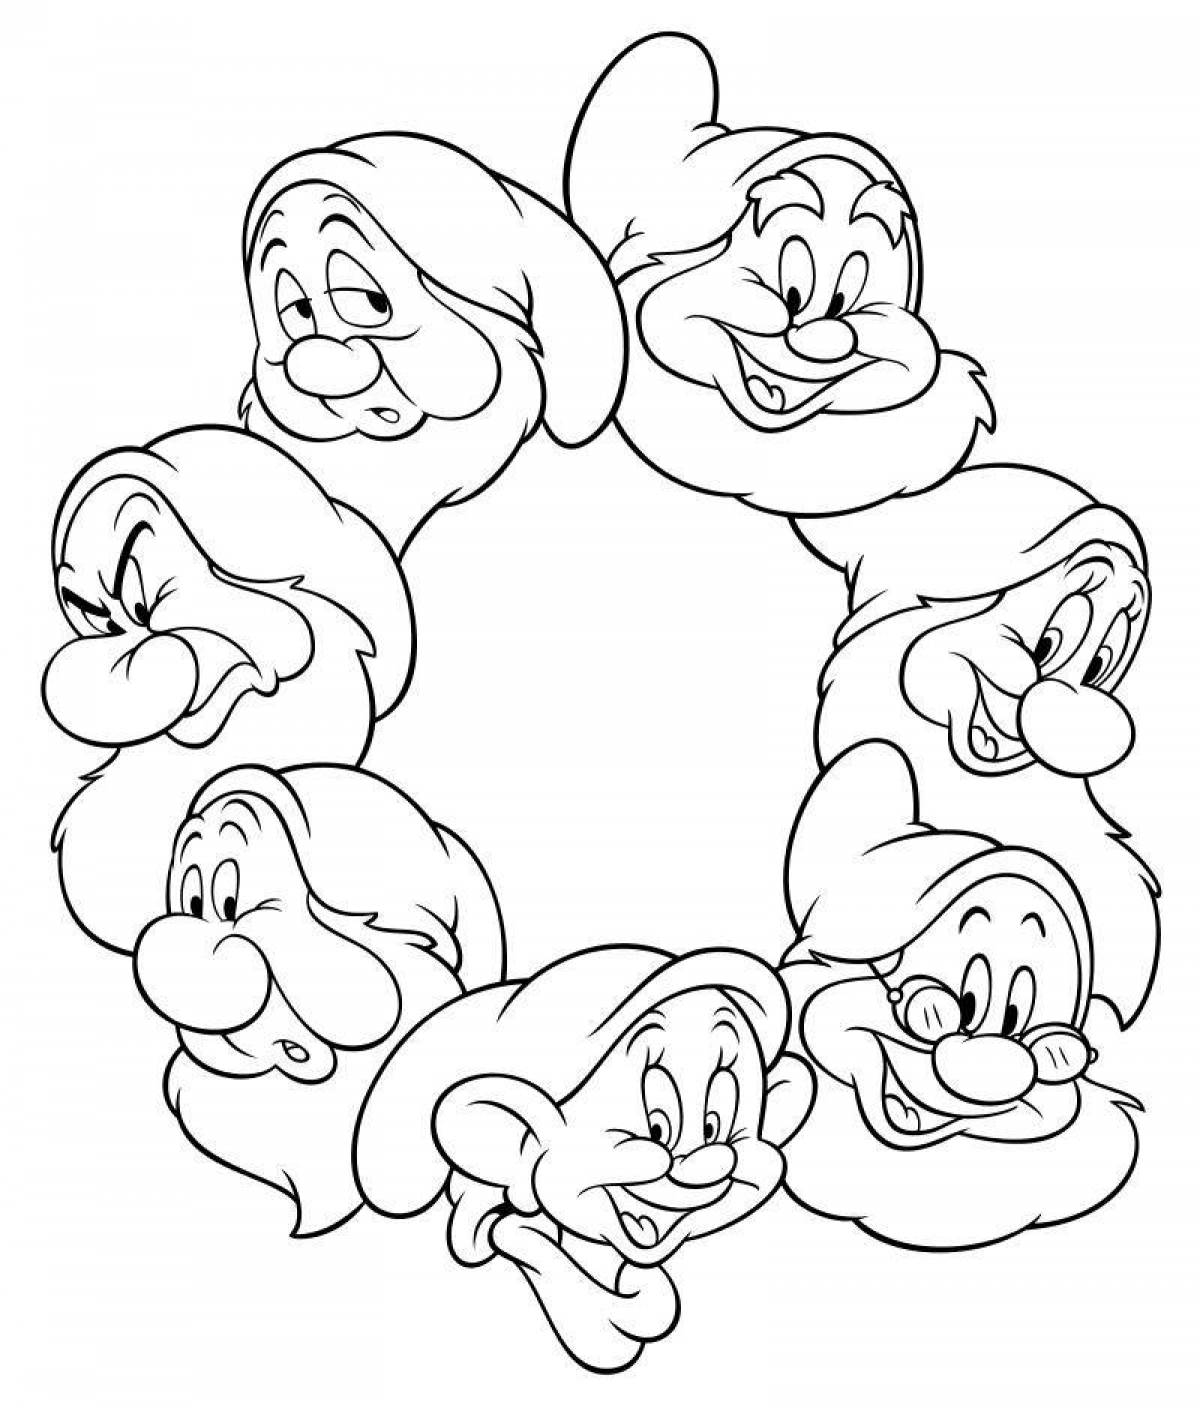 Cute gnome coloring pages